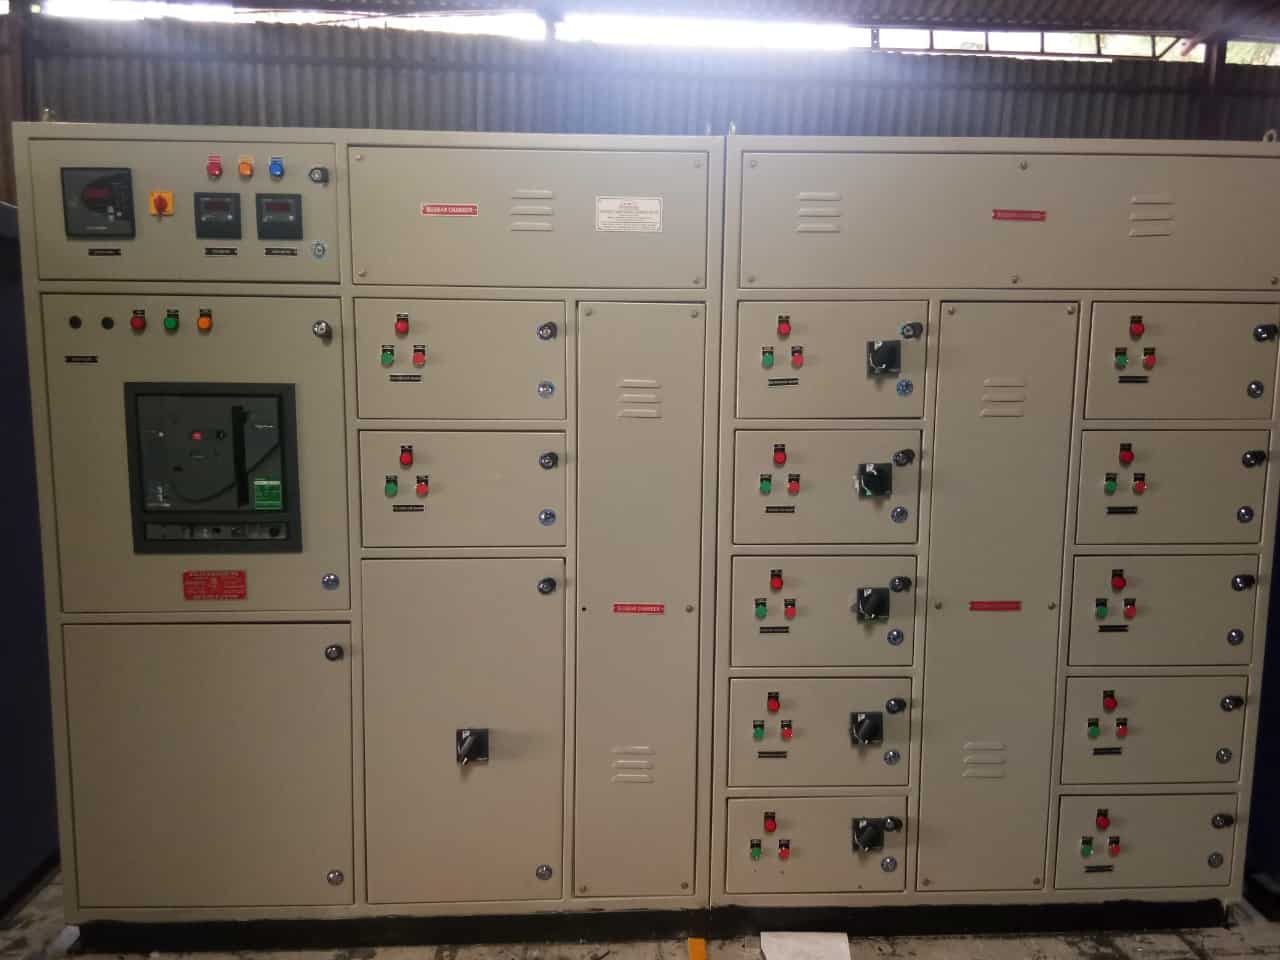 APFC (Automatic Power Factor Control) Panel